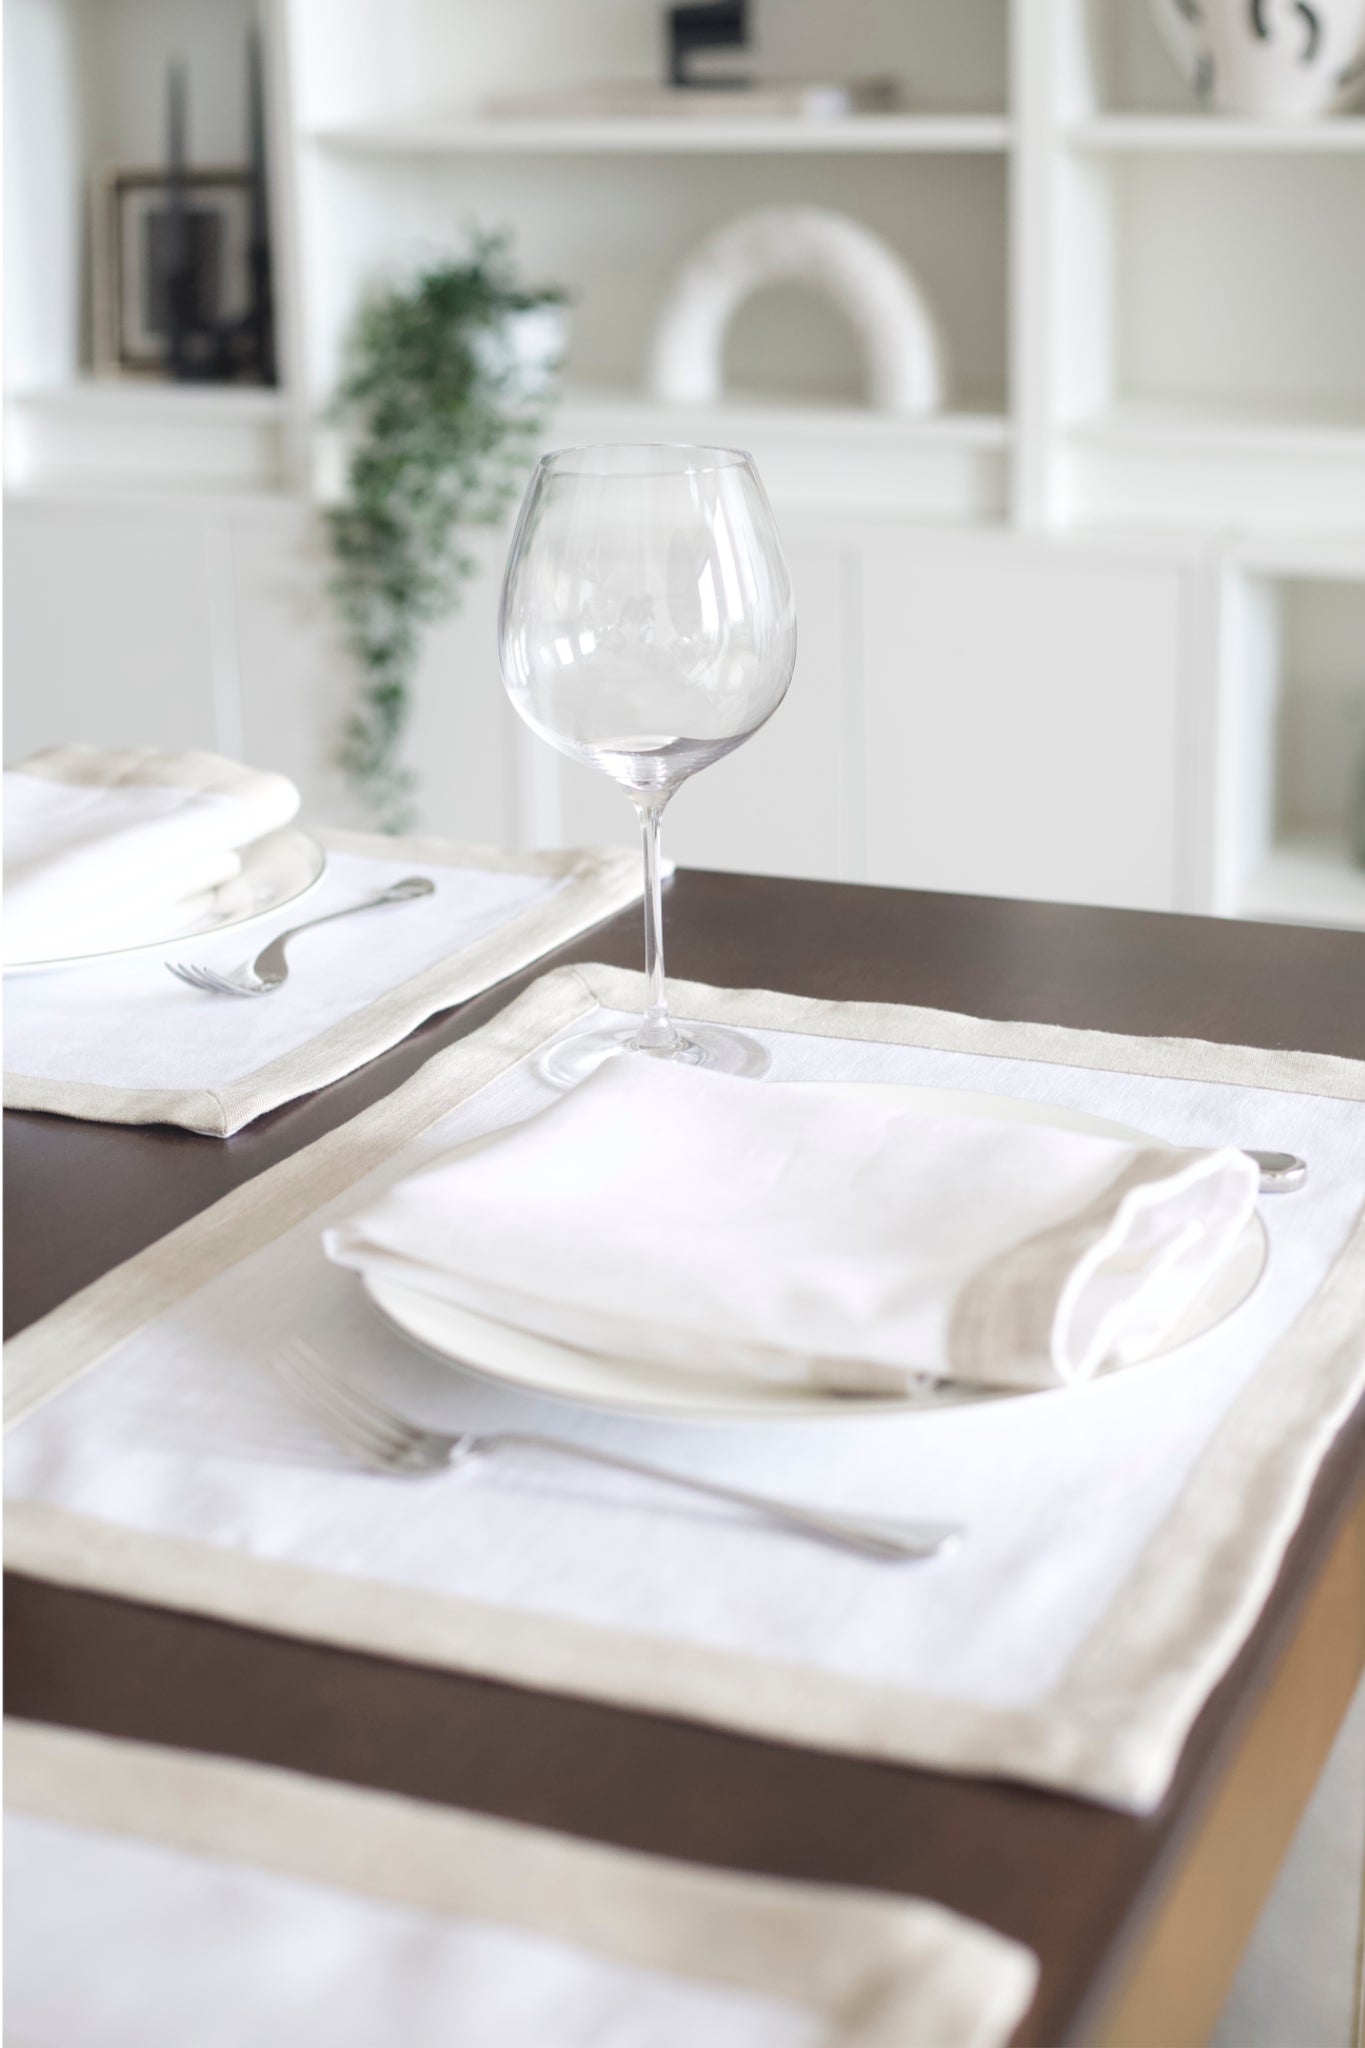 Set of 4 Contrast Border Placemat Oatmeal/White